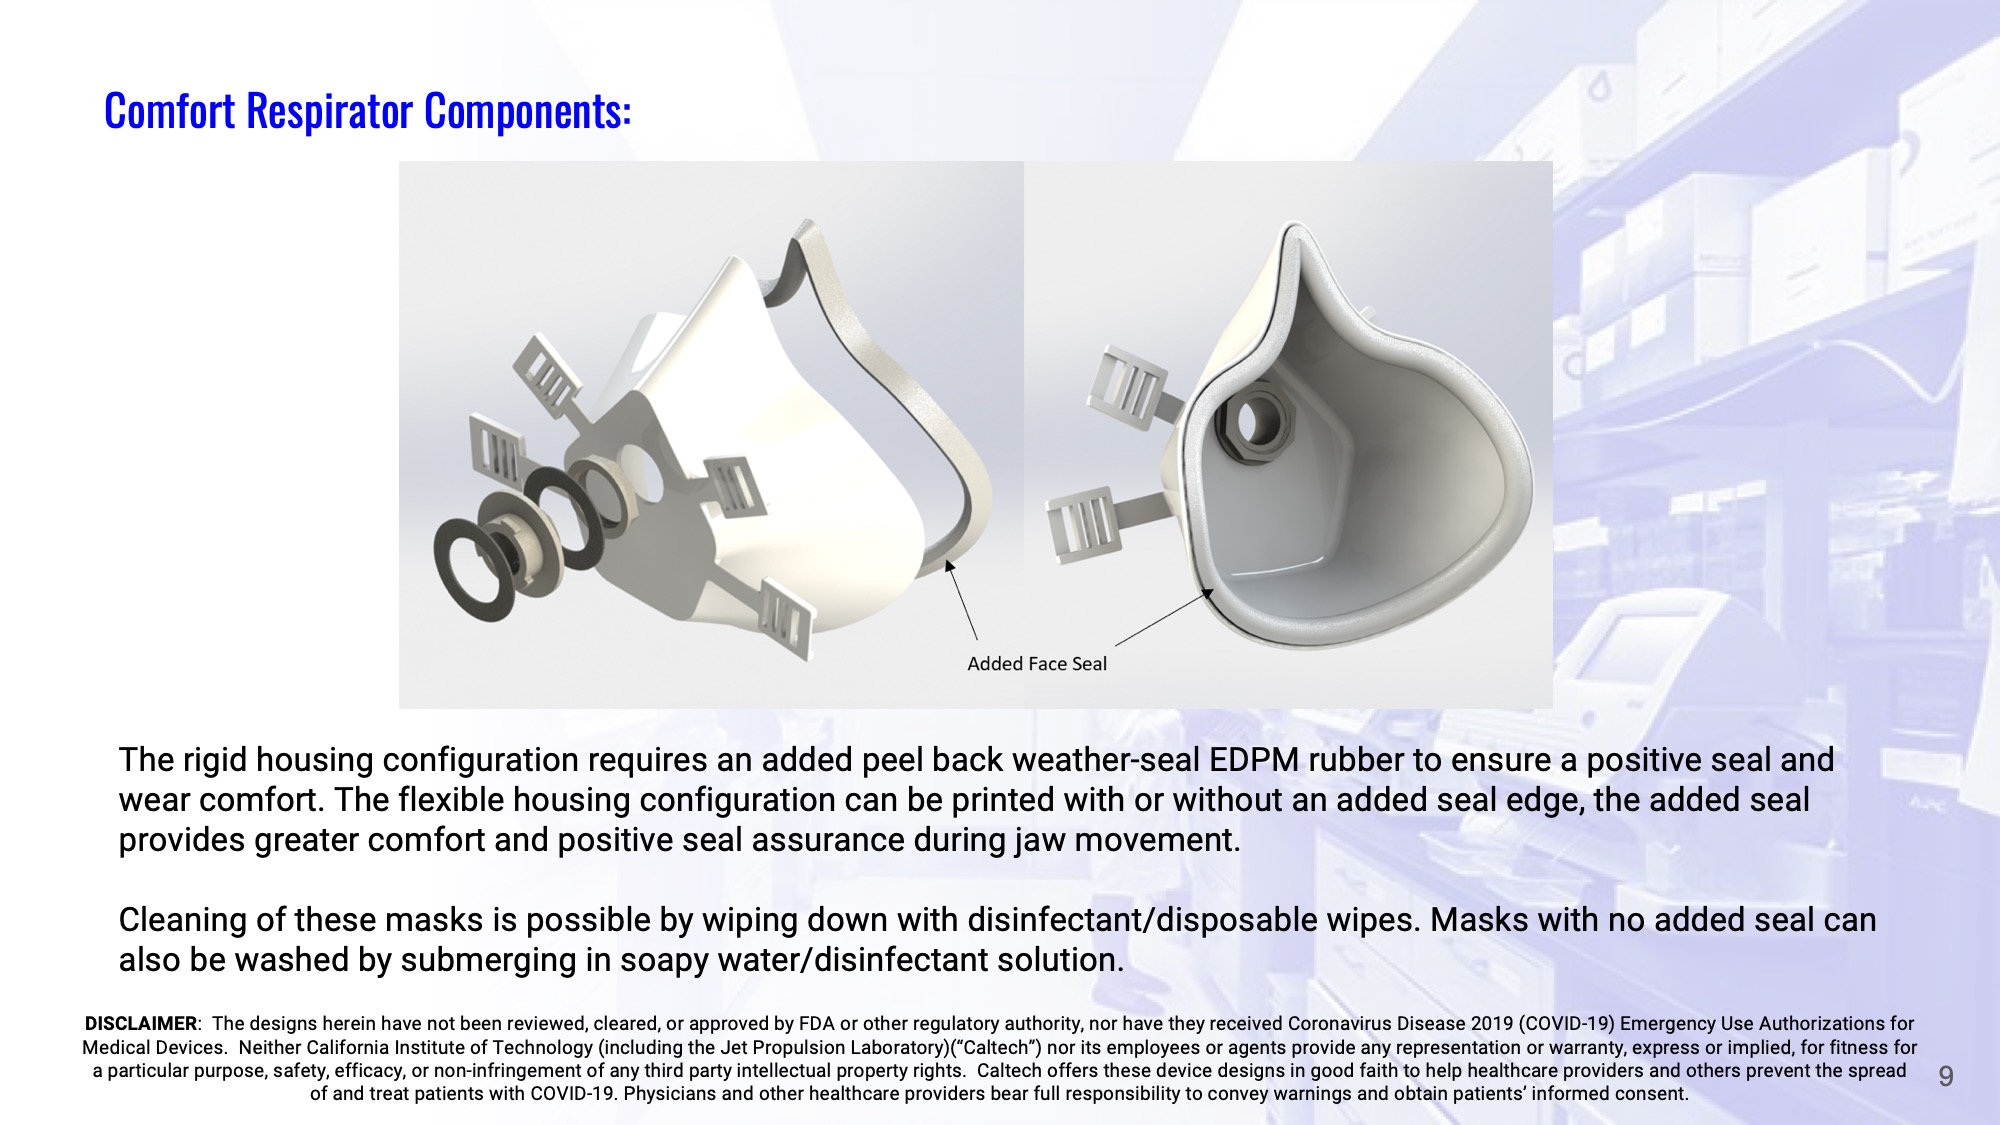 Slide 9: Comfort Respirator – components: The rigid housing configuration requires an added peel back weather-seal EDPM rubber to ensure a positive seal and wear comfort. The flexible housing configuration can be printed with or without an added seal edge, the added seal provides greater comfort and positive seal assurance during jaw movement.  Cleaning of these masks is possible by wiping down with disinfectant/disposable wipes. Masks with no added seal can also be washed by submerging in soapy water/disinfectant solution.